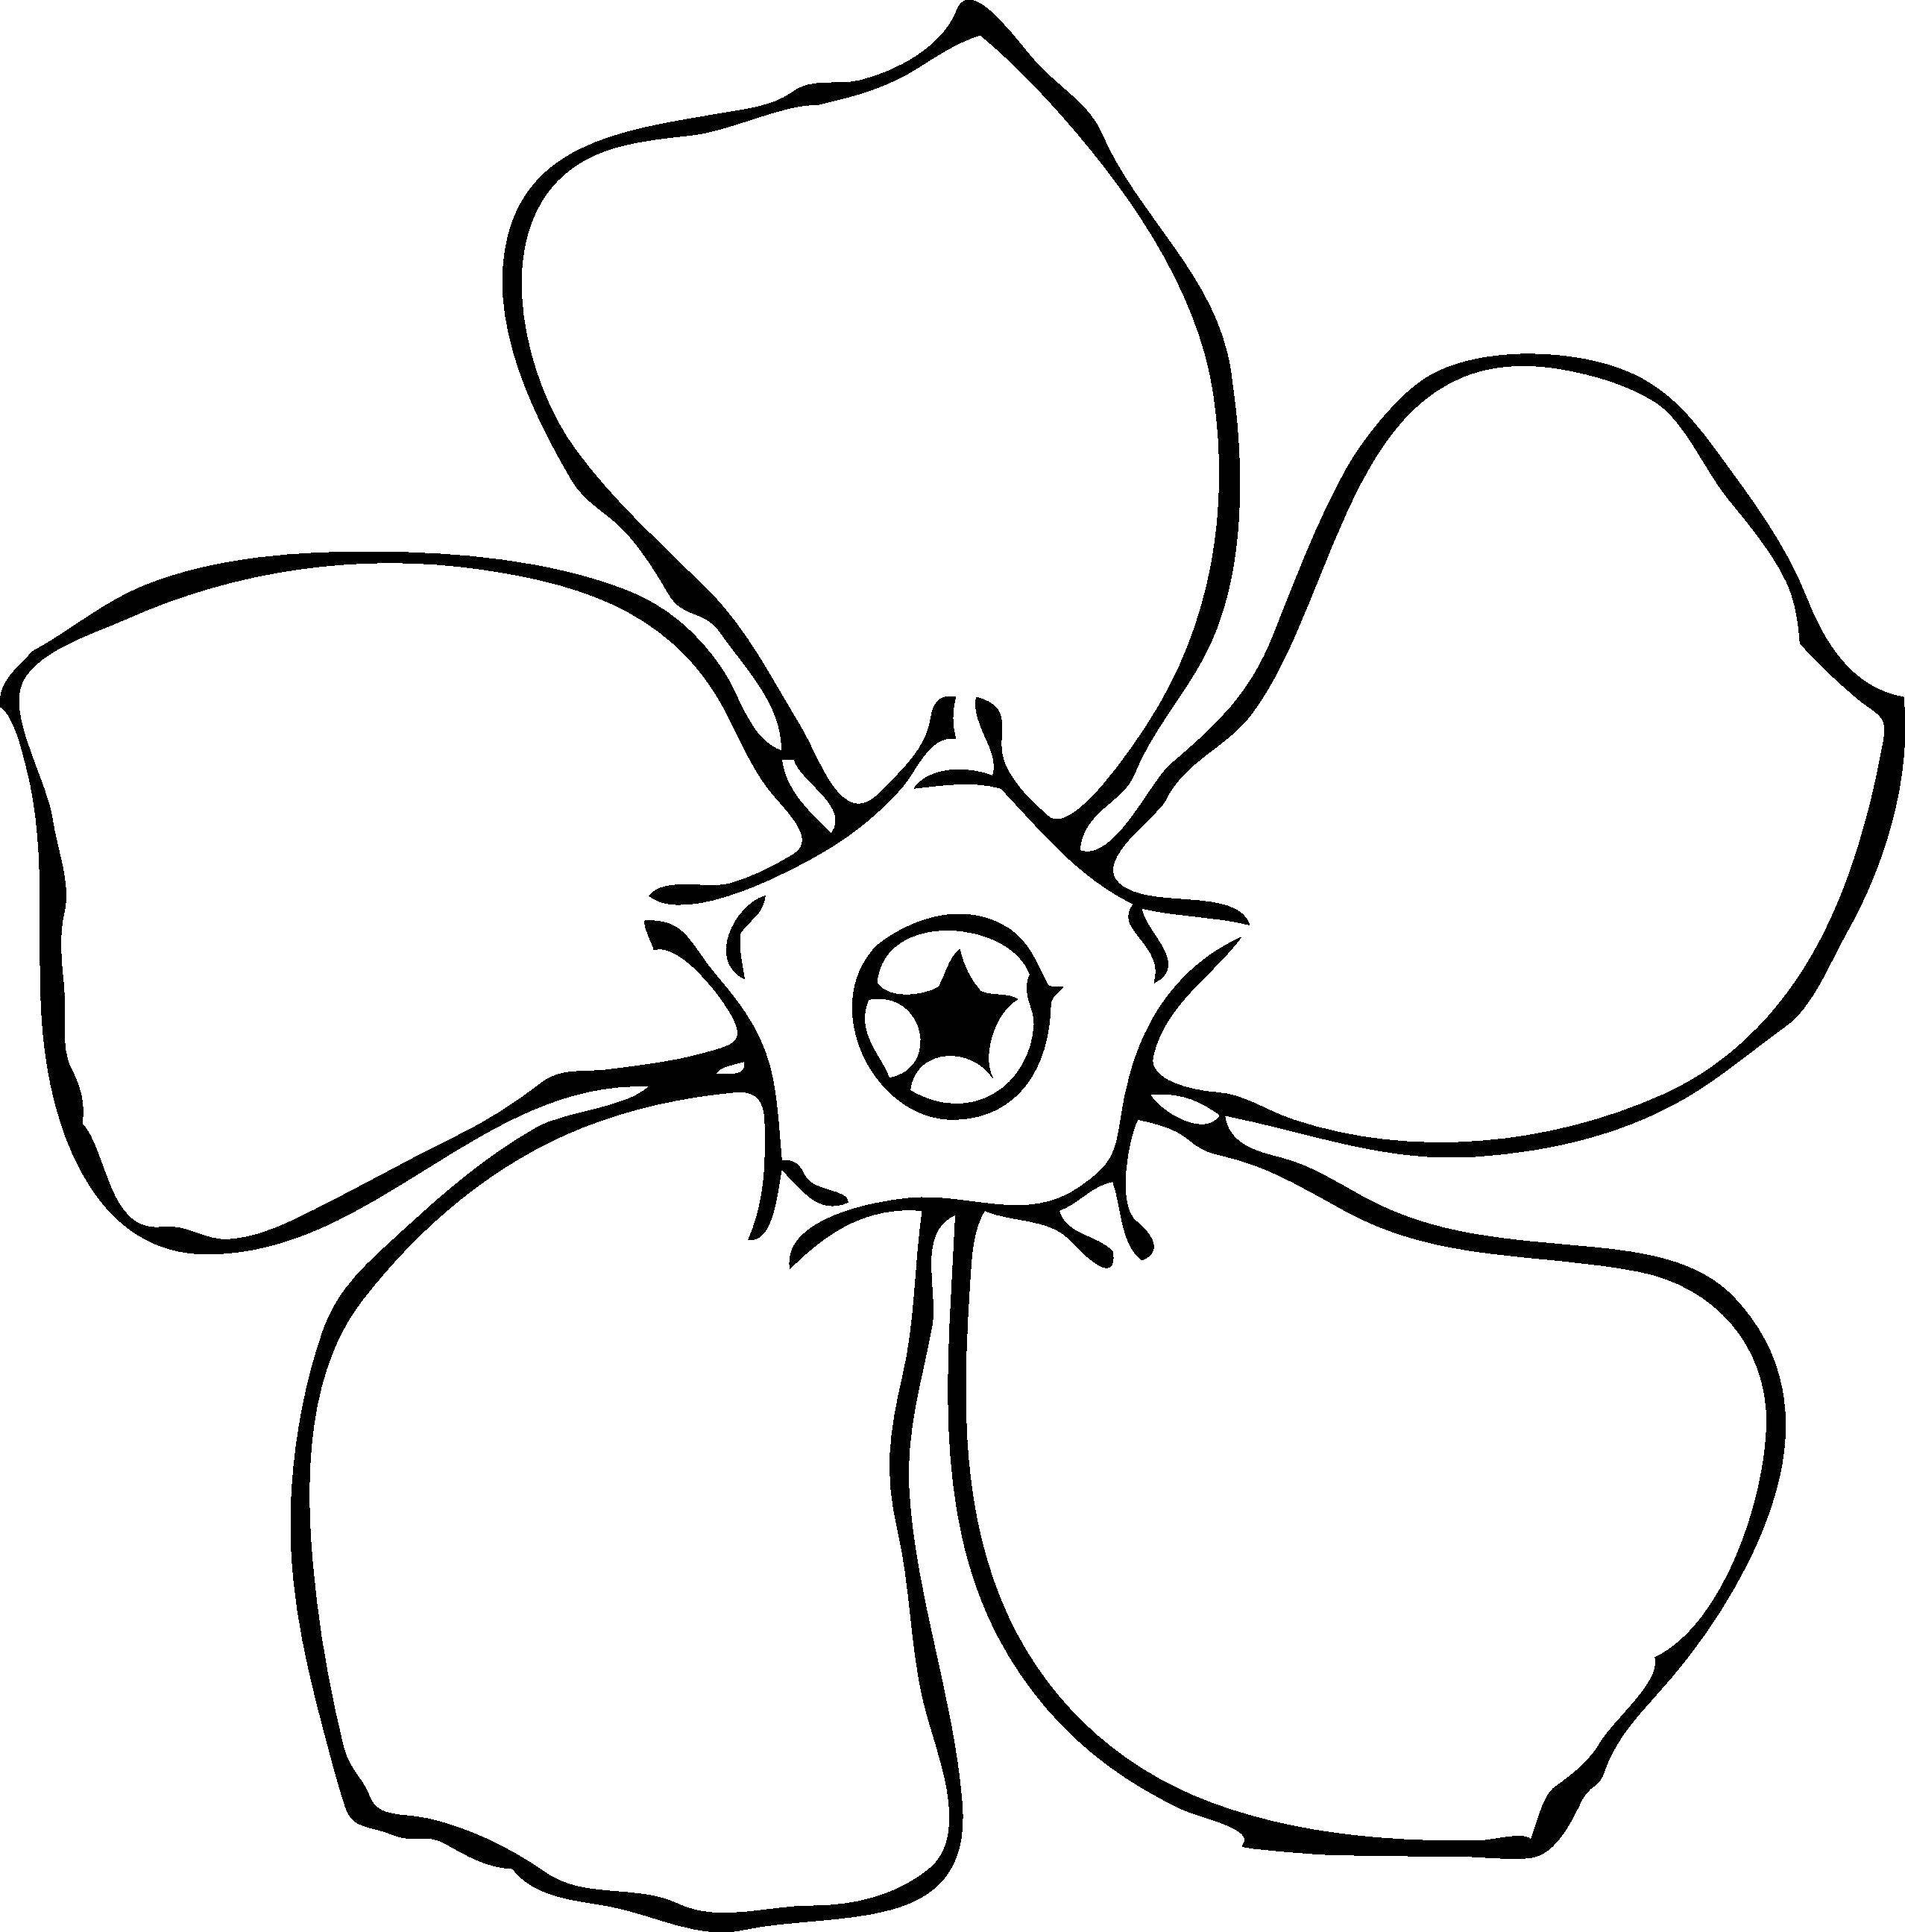 Coloring Flower, asterisk. Category Flowers. Tags:  flowers, star.